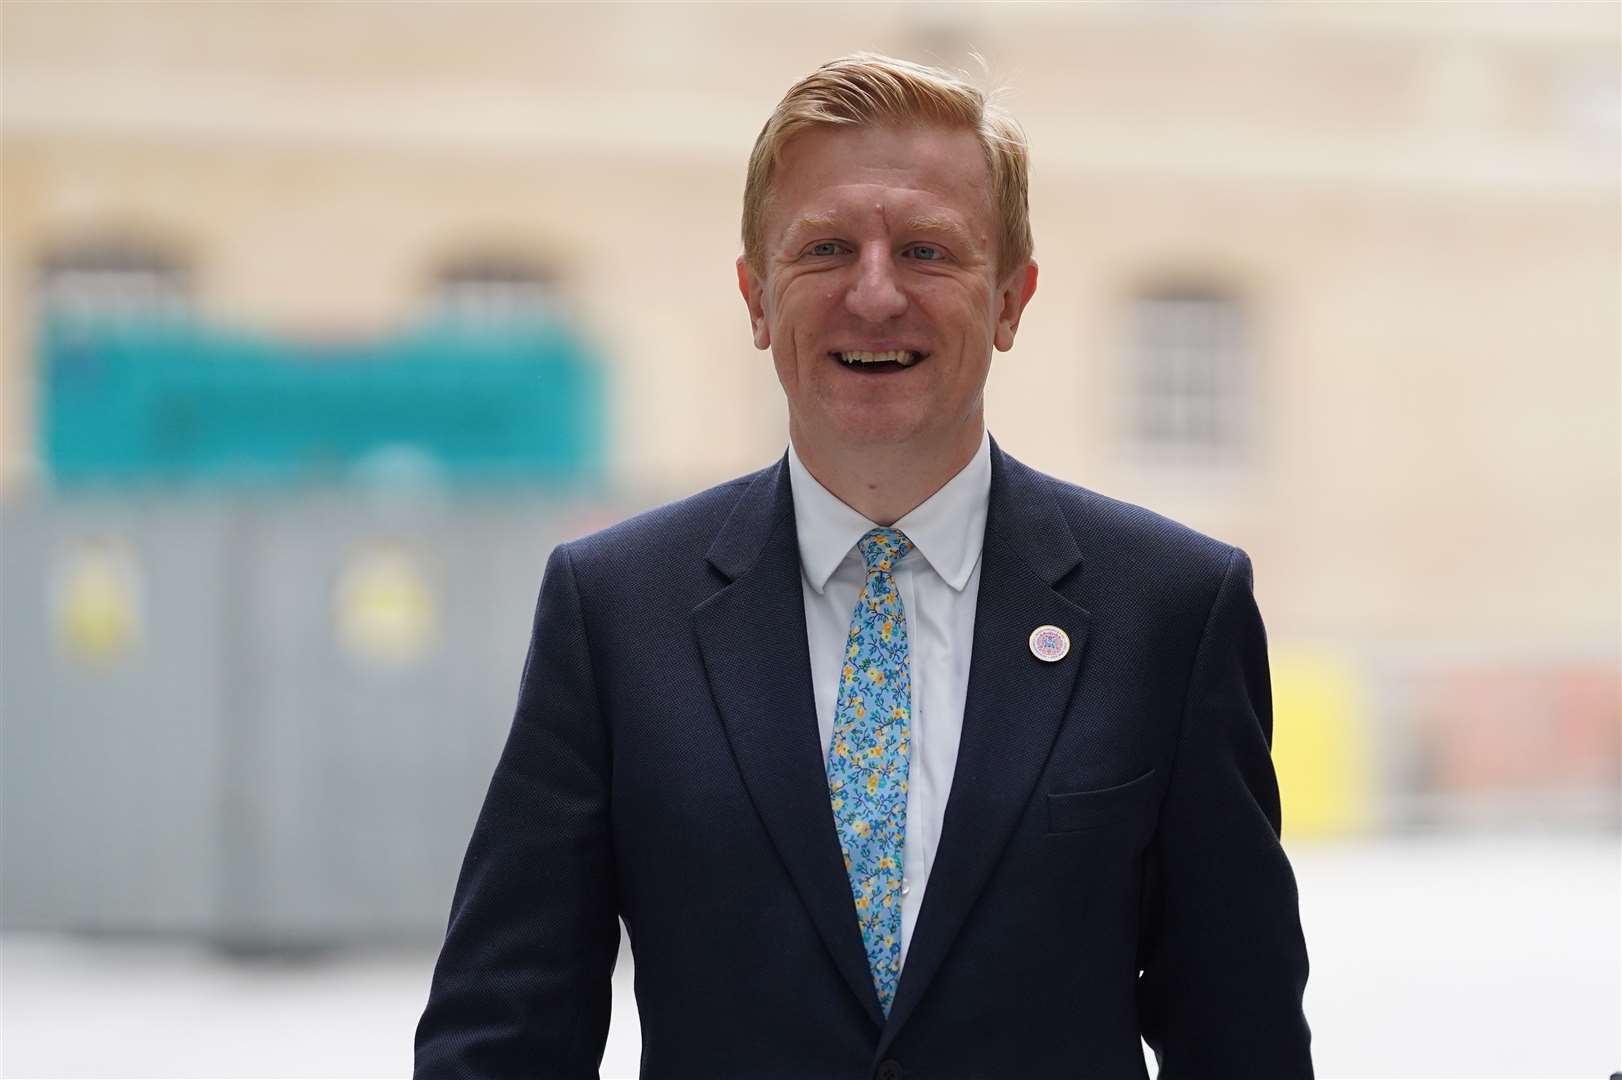 Oliver Dowden stopped short of saying whether the Cabinet Office deemed Ms Gray to have broken rules (Stefan Rousseau/PA)